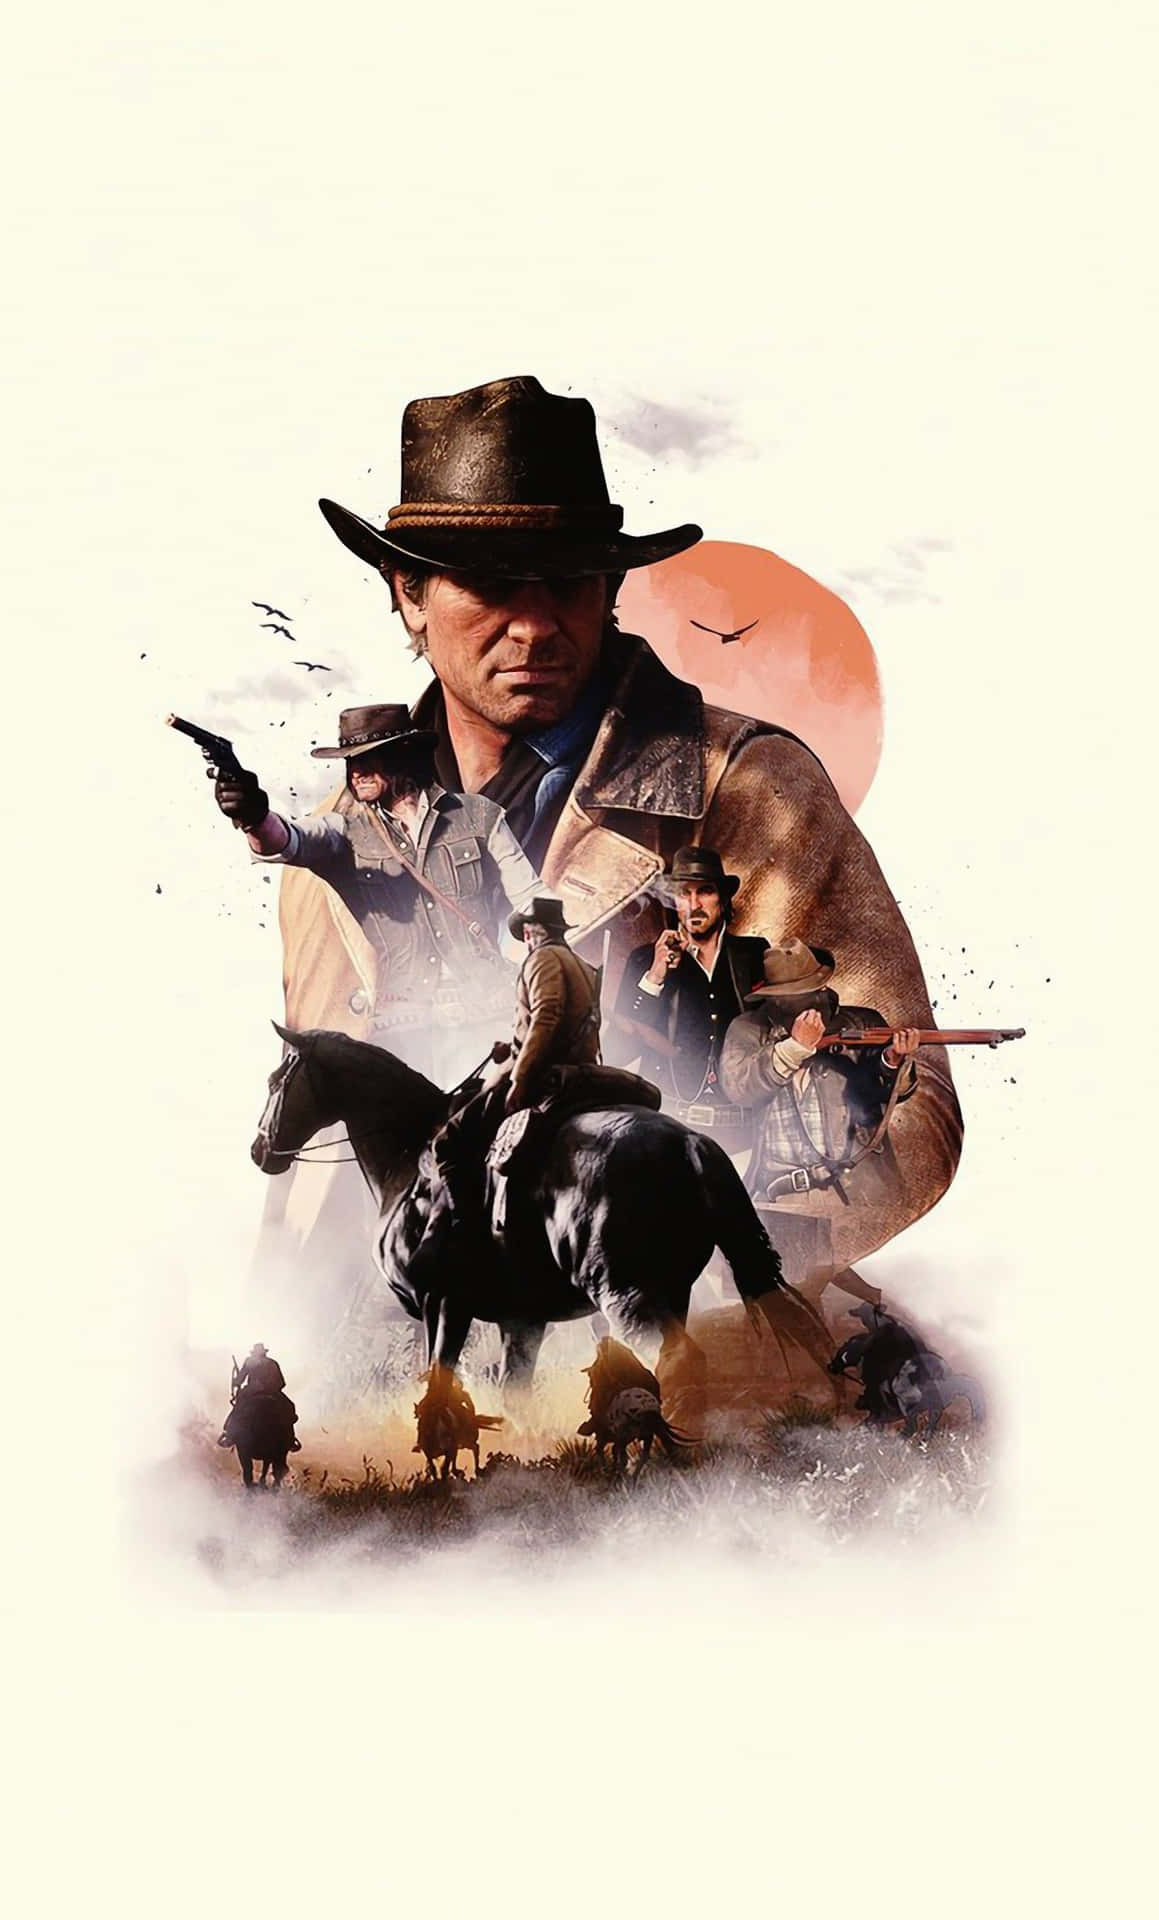 Unlock the Wild West with Cowboy Iphone Wallpaper